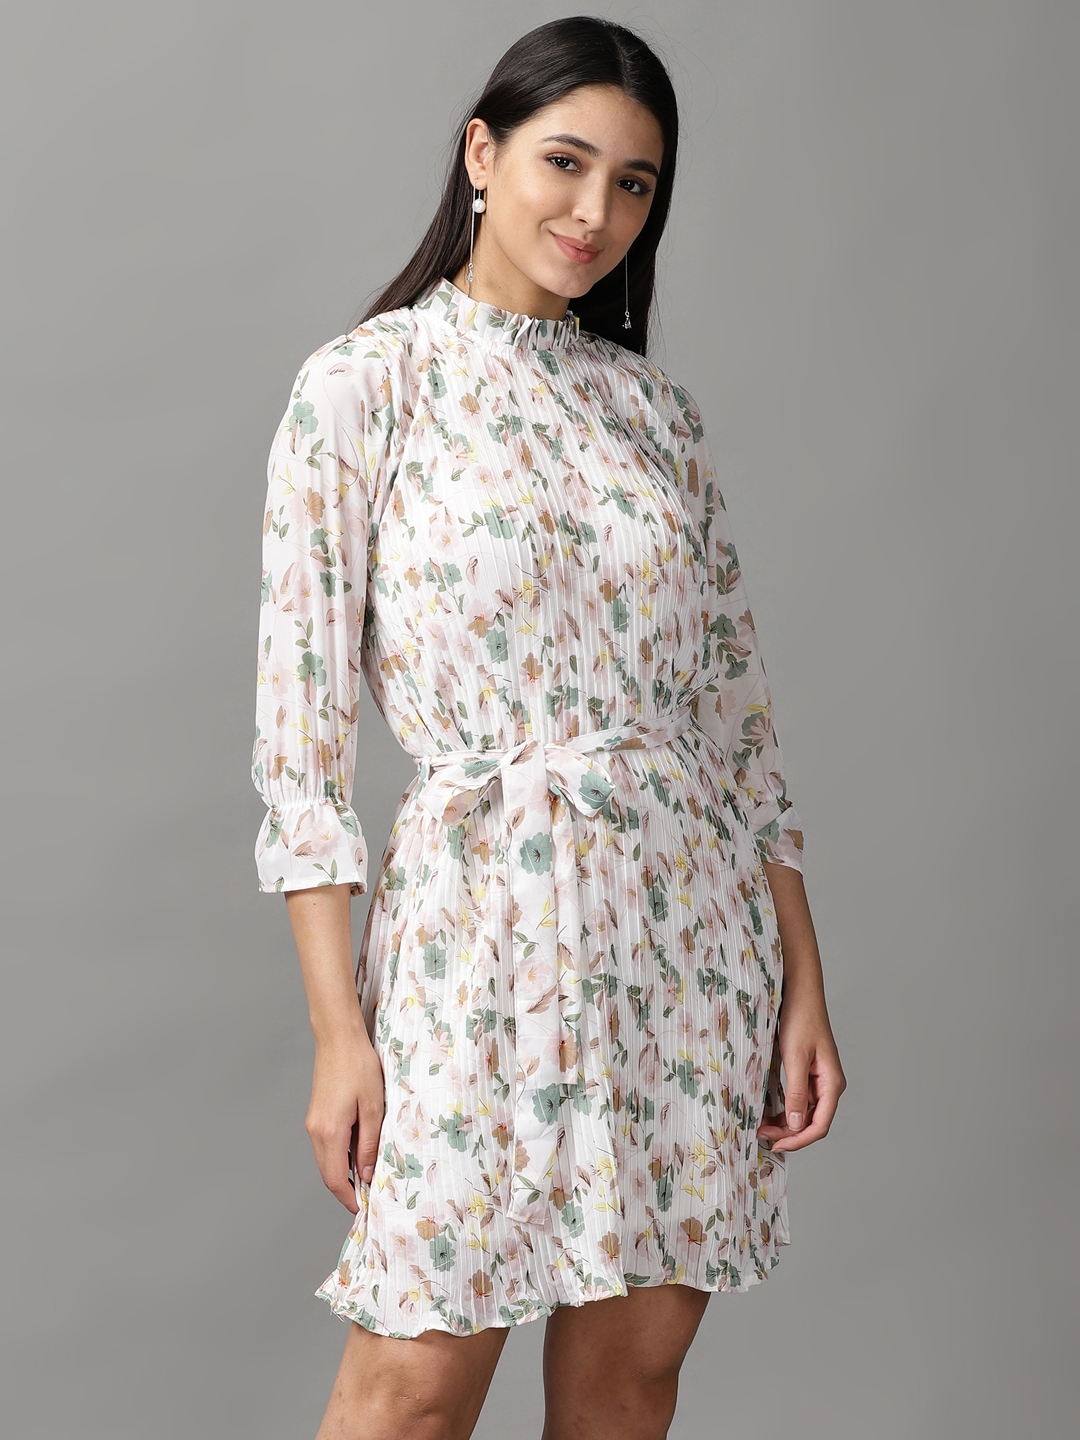 Women's White Polyester Floral Dresses